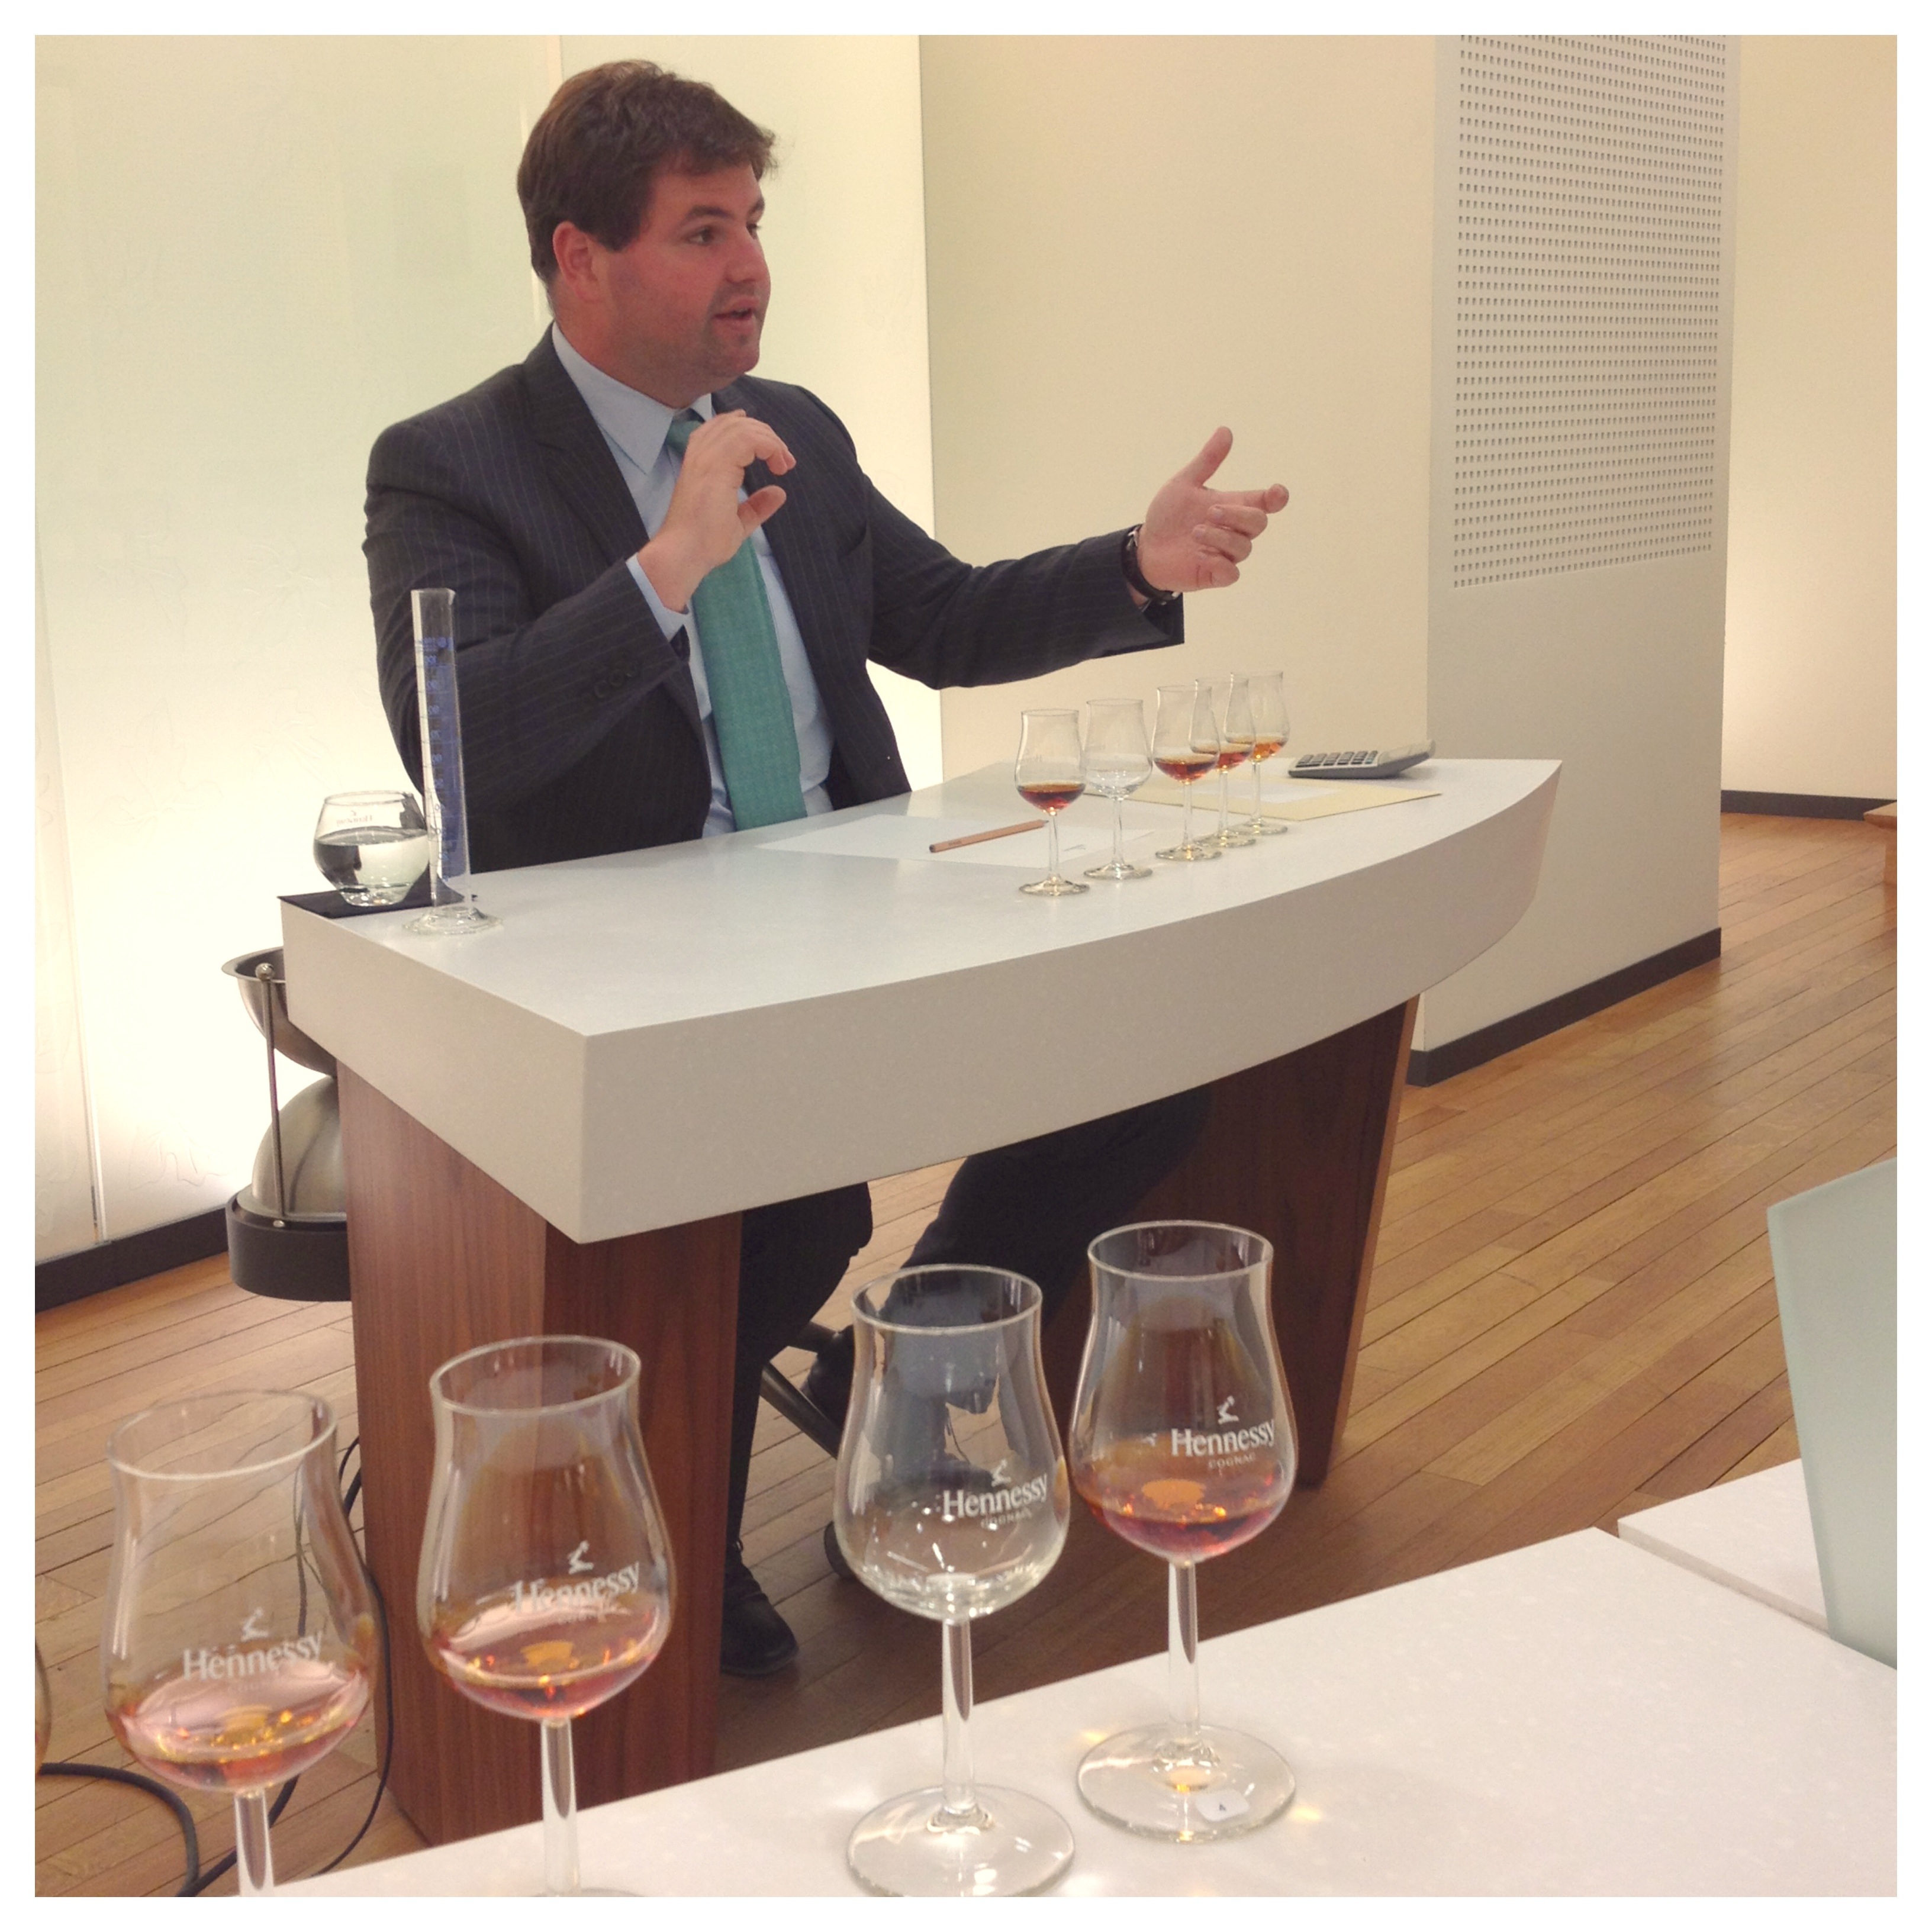 Tasting & Blending session with Renaud